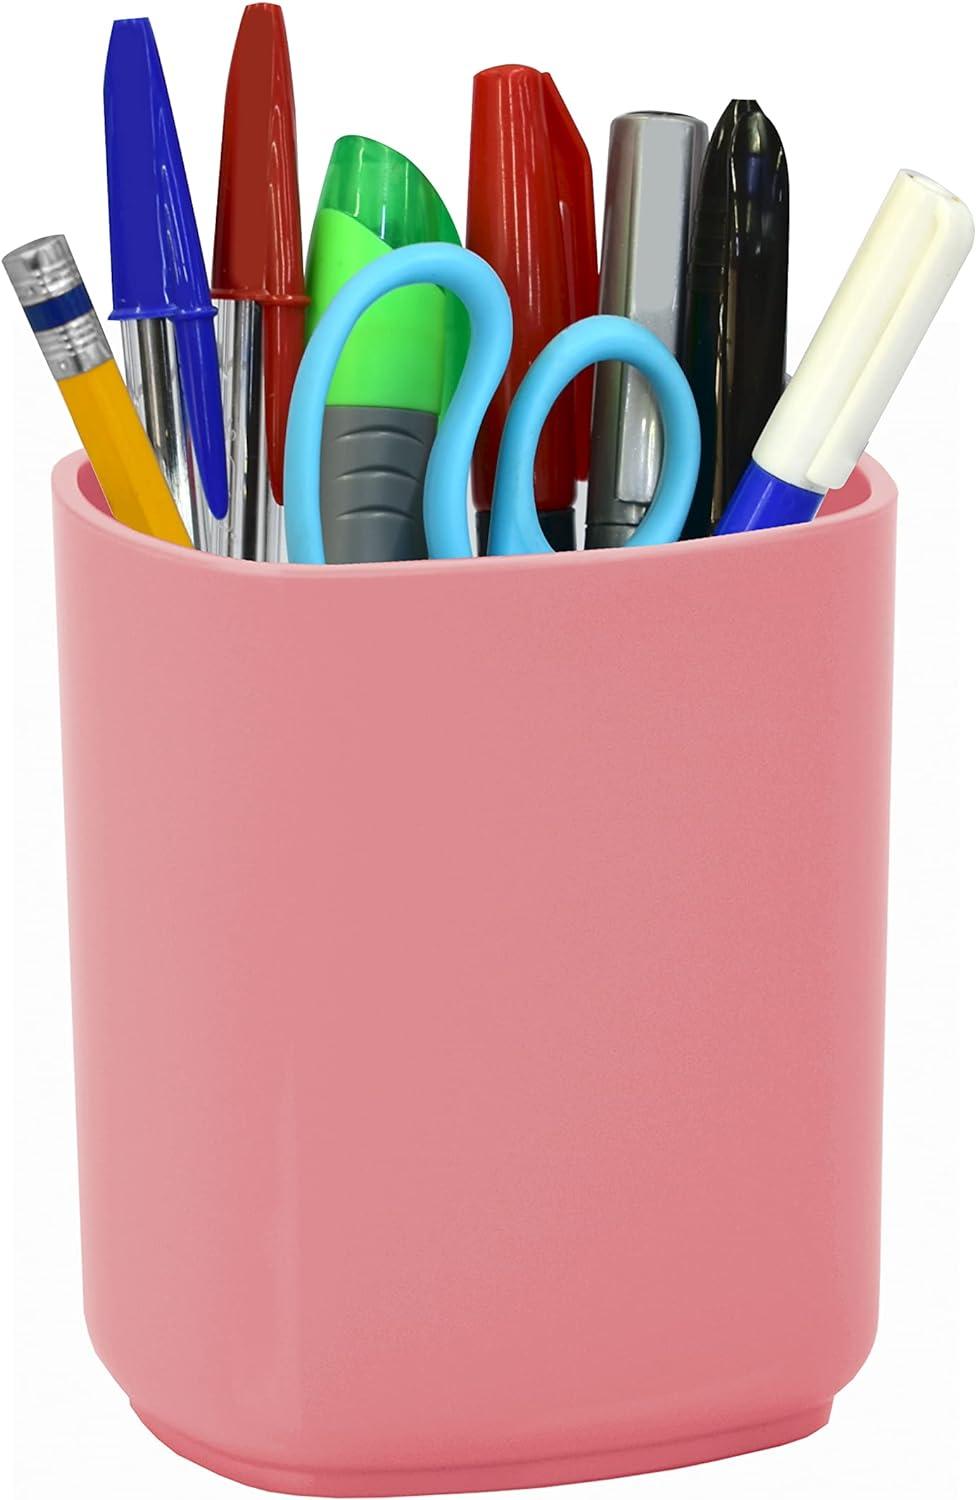 acrimet jumbo pencil holder pen cup caddy super-sized desktop organizer for students artists and